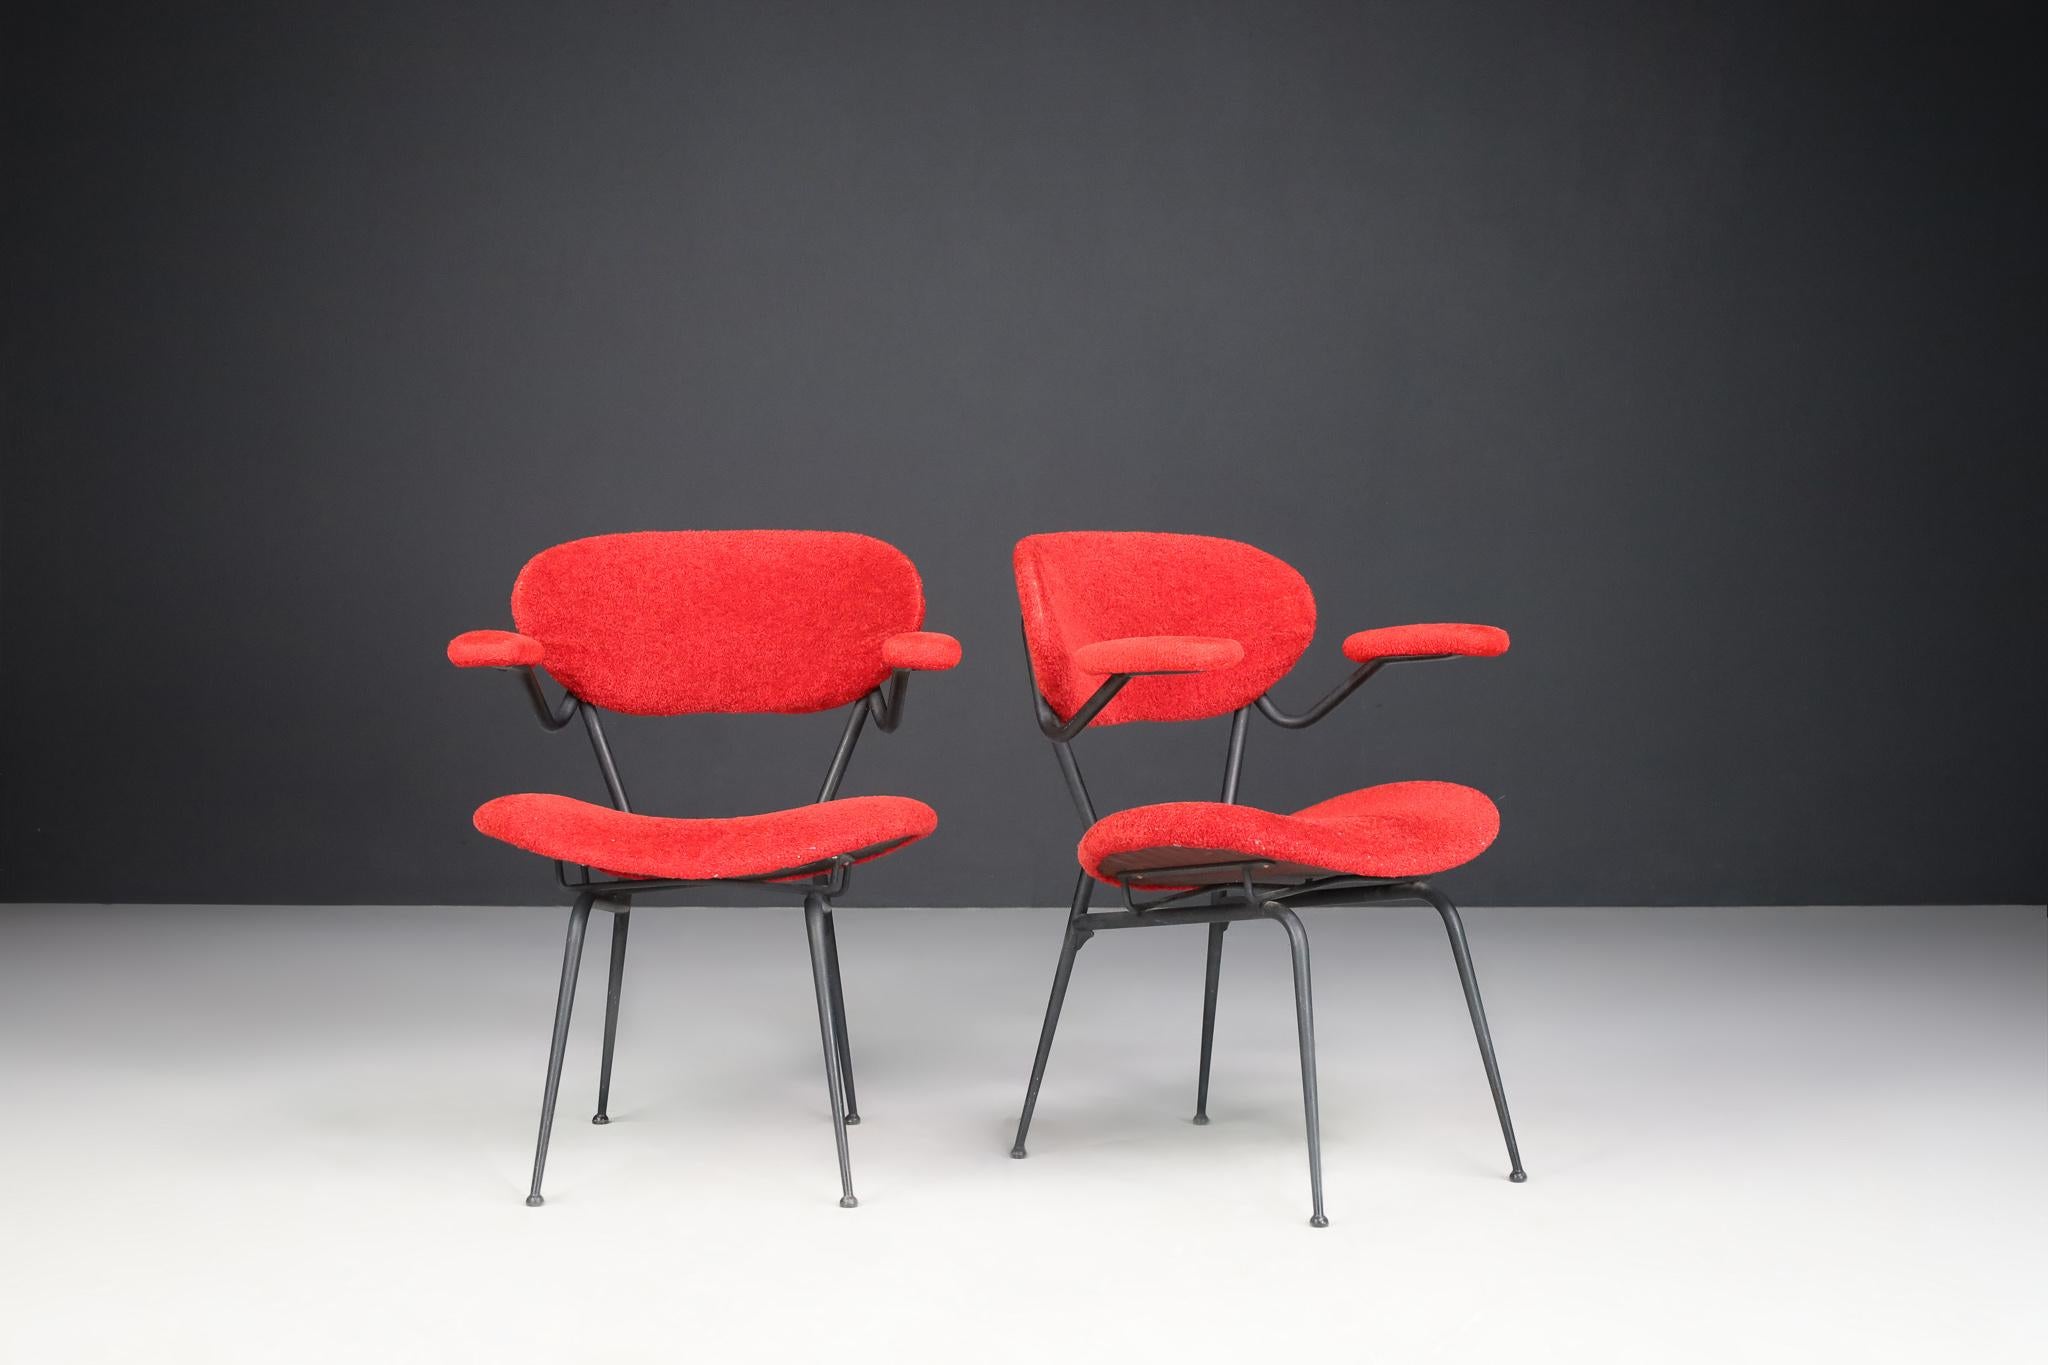 Red Mid-century Modern Armchairs by Gastone Rinaldi, Italy 1960s 
 
Gastone Rinaldi designed this beautiful and iconic pair of rare armchairs in 1954, Italy. The shape of the armchairs is sculptural, unique, and extraordinary: the two soft armrests